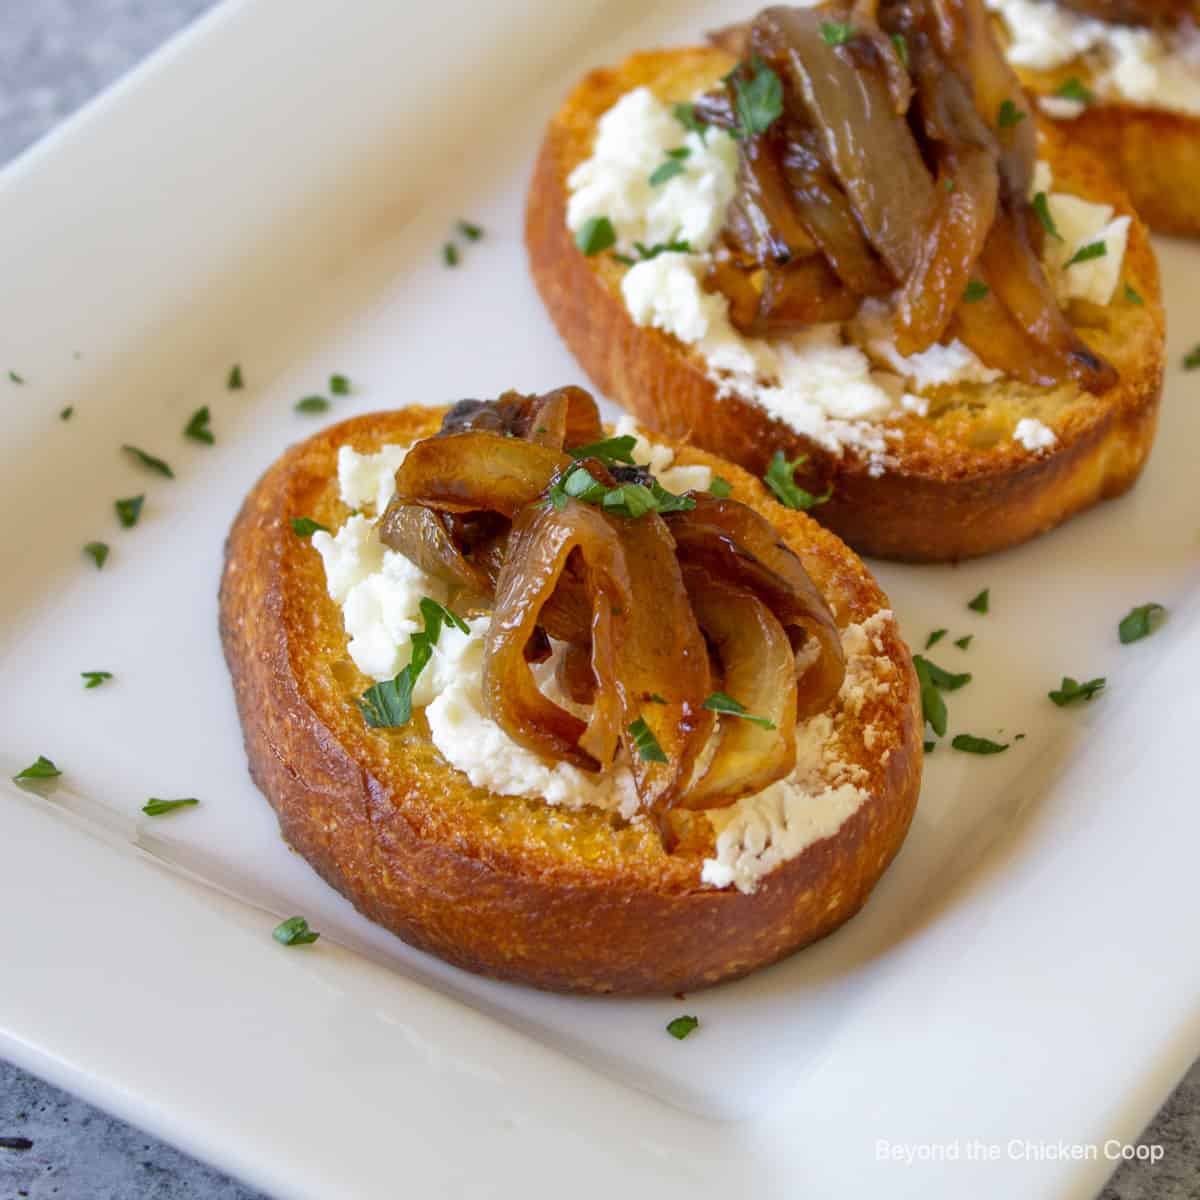 Crostini topped with goat cheese and caramelized onions on a platter.